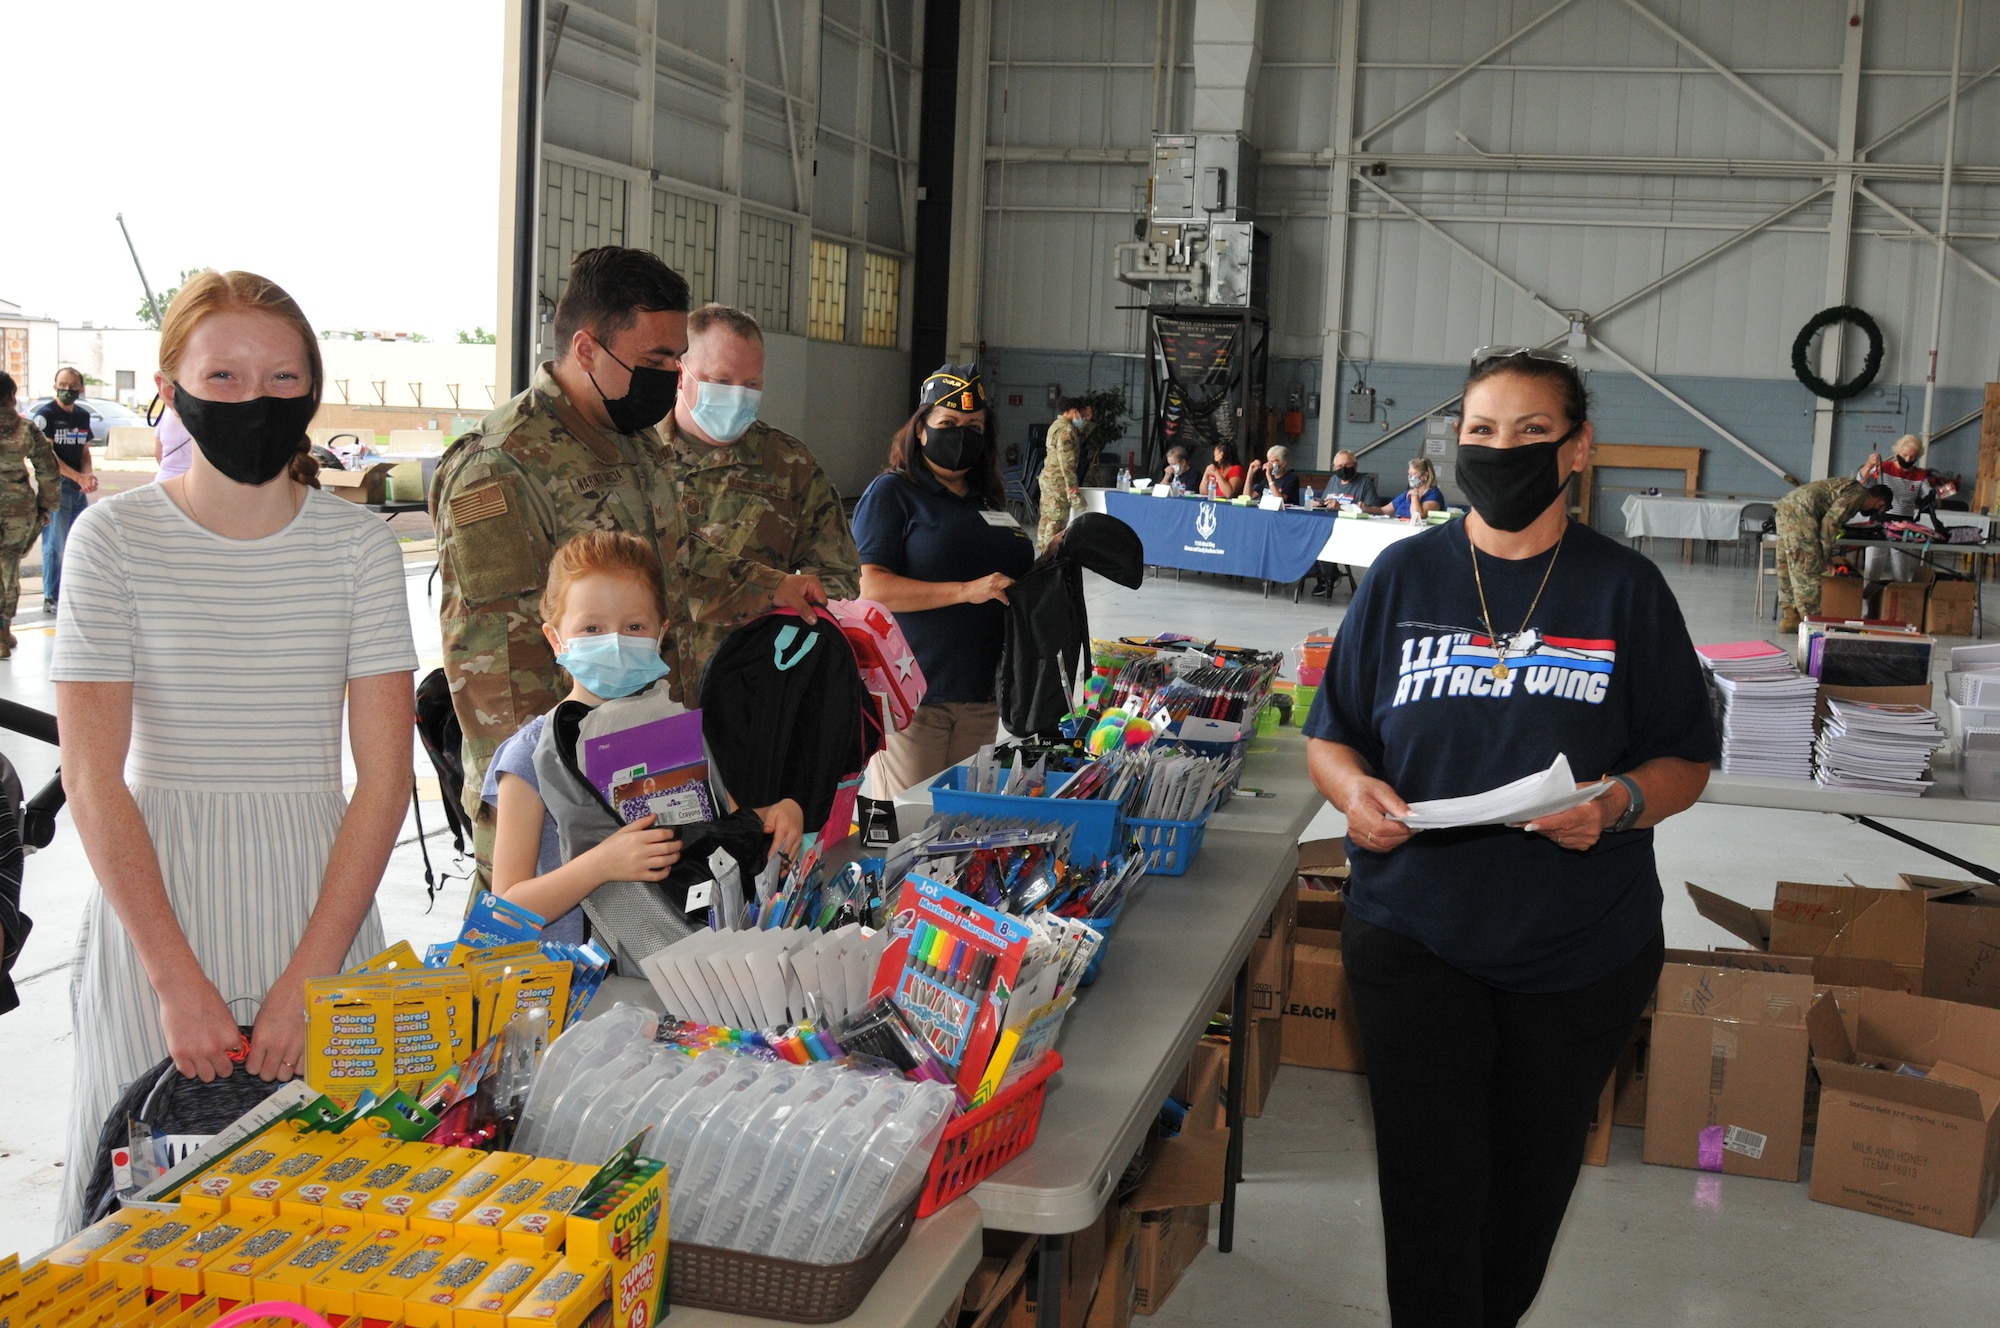 A woman in a mask poses next to a table of school supplies opposite a military family.